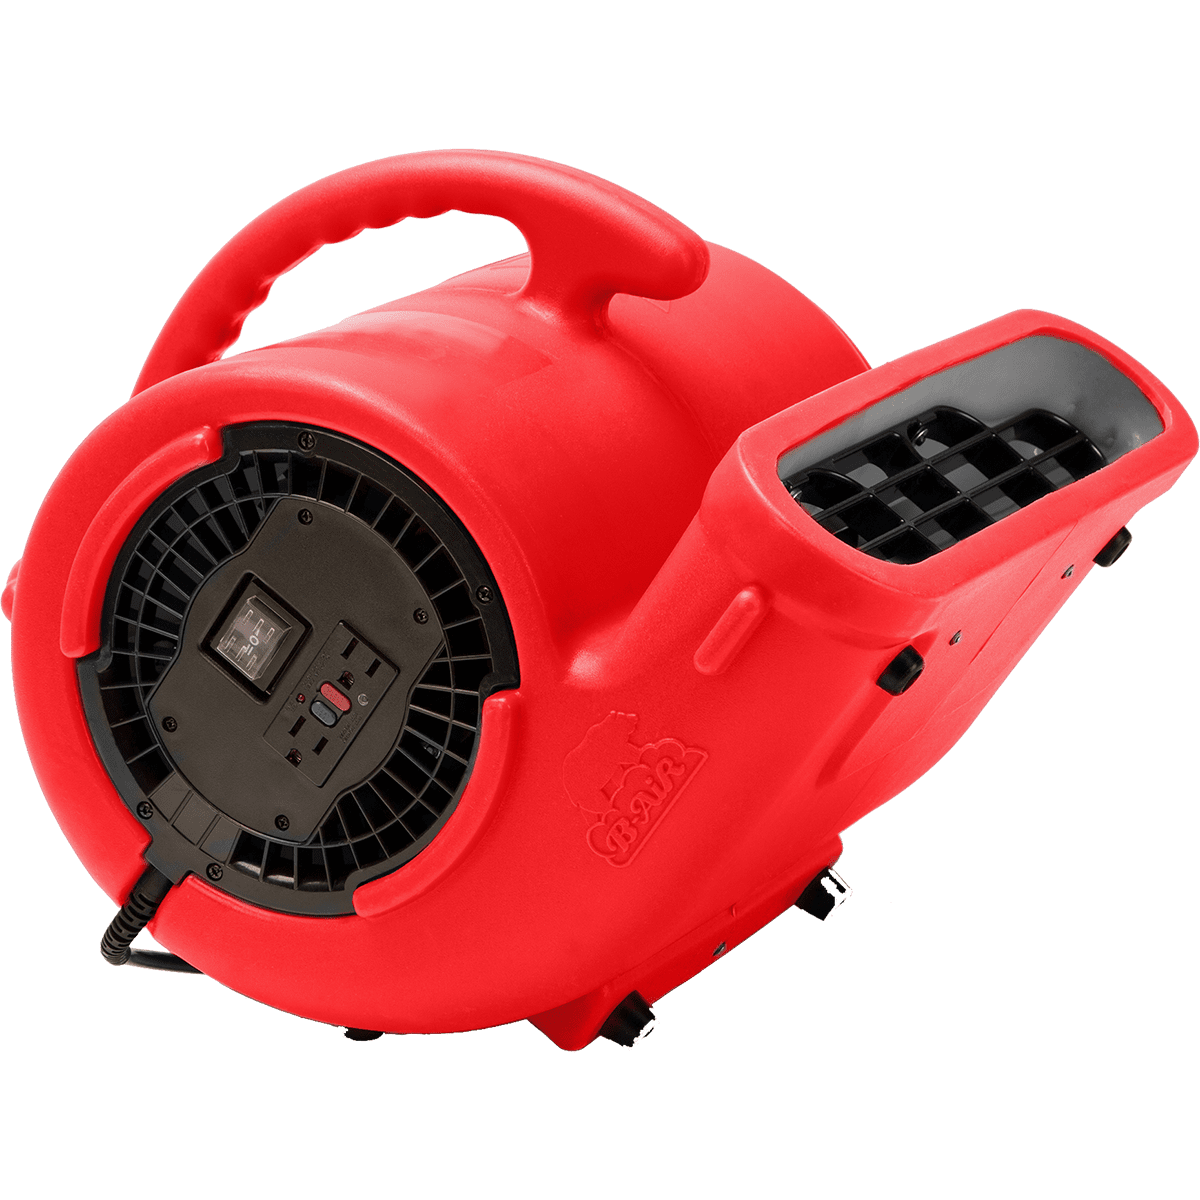 B-air Vent Vp-33 Air Mover - Red